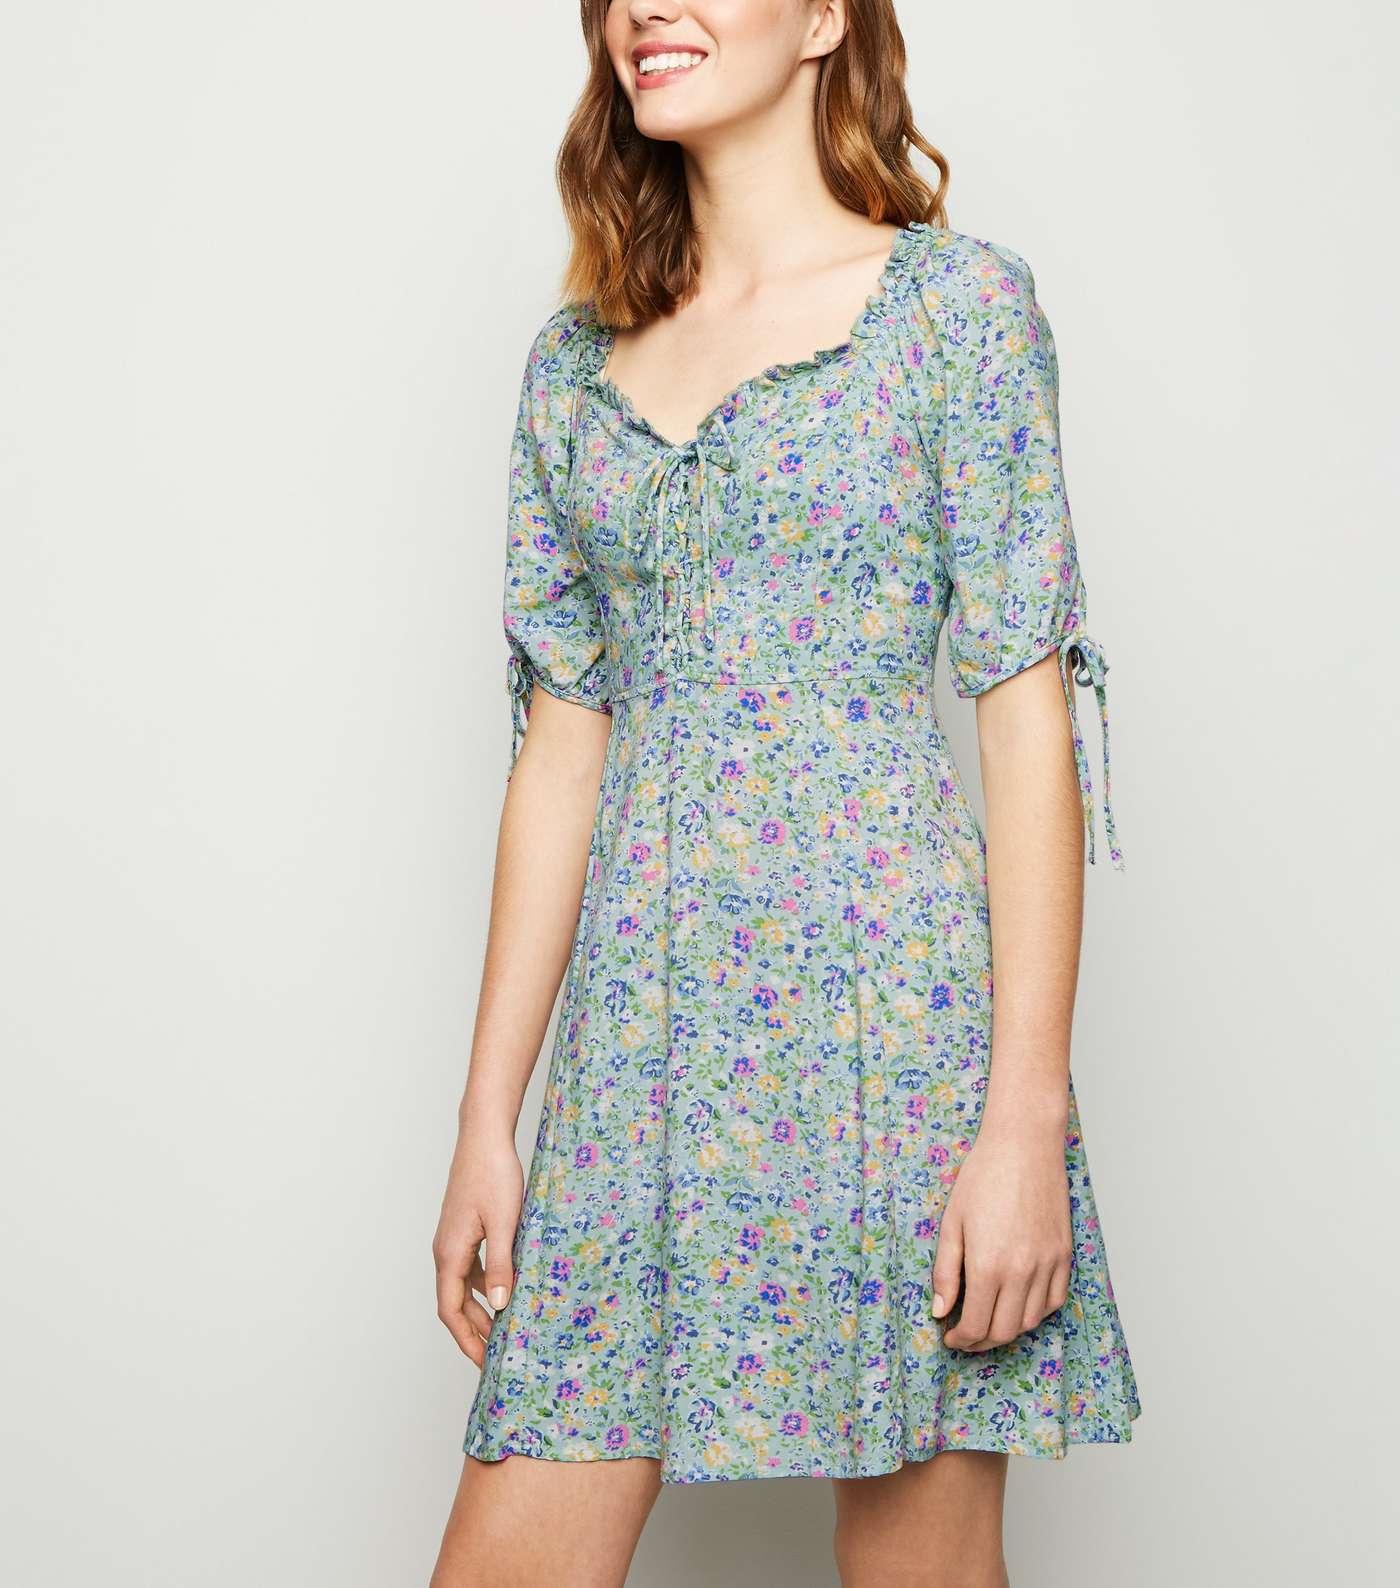 Green Ditsy Floral Lace Up Milkmaid Dress Image 2